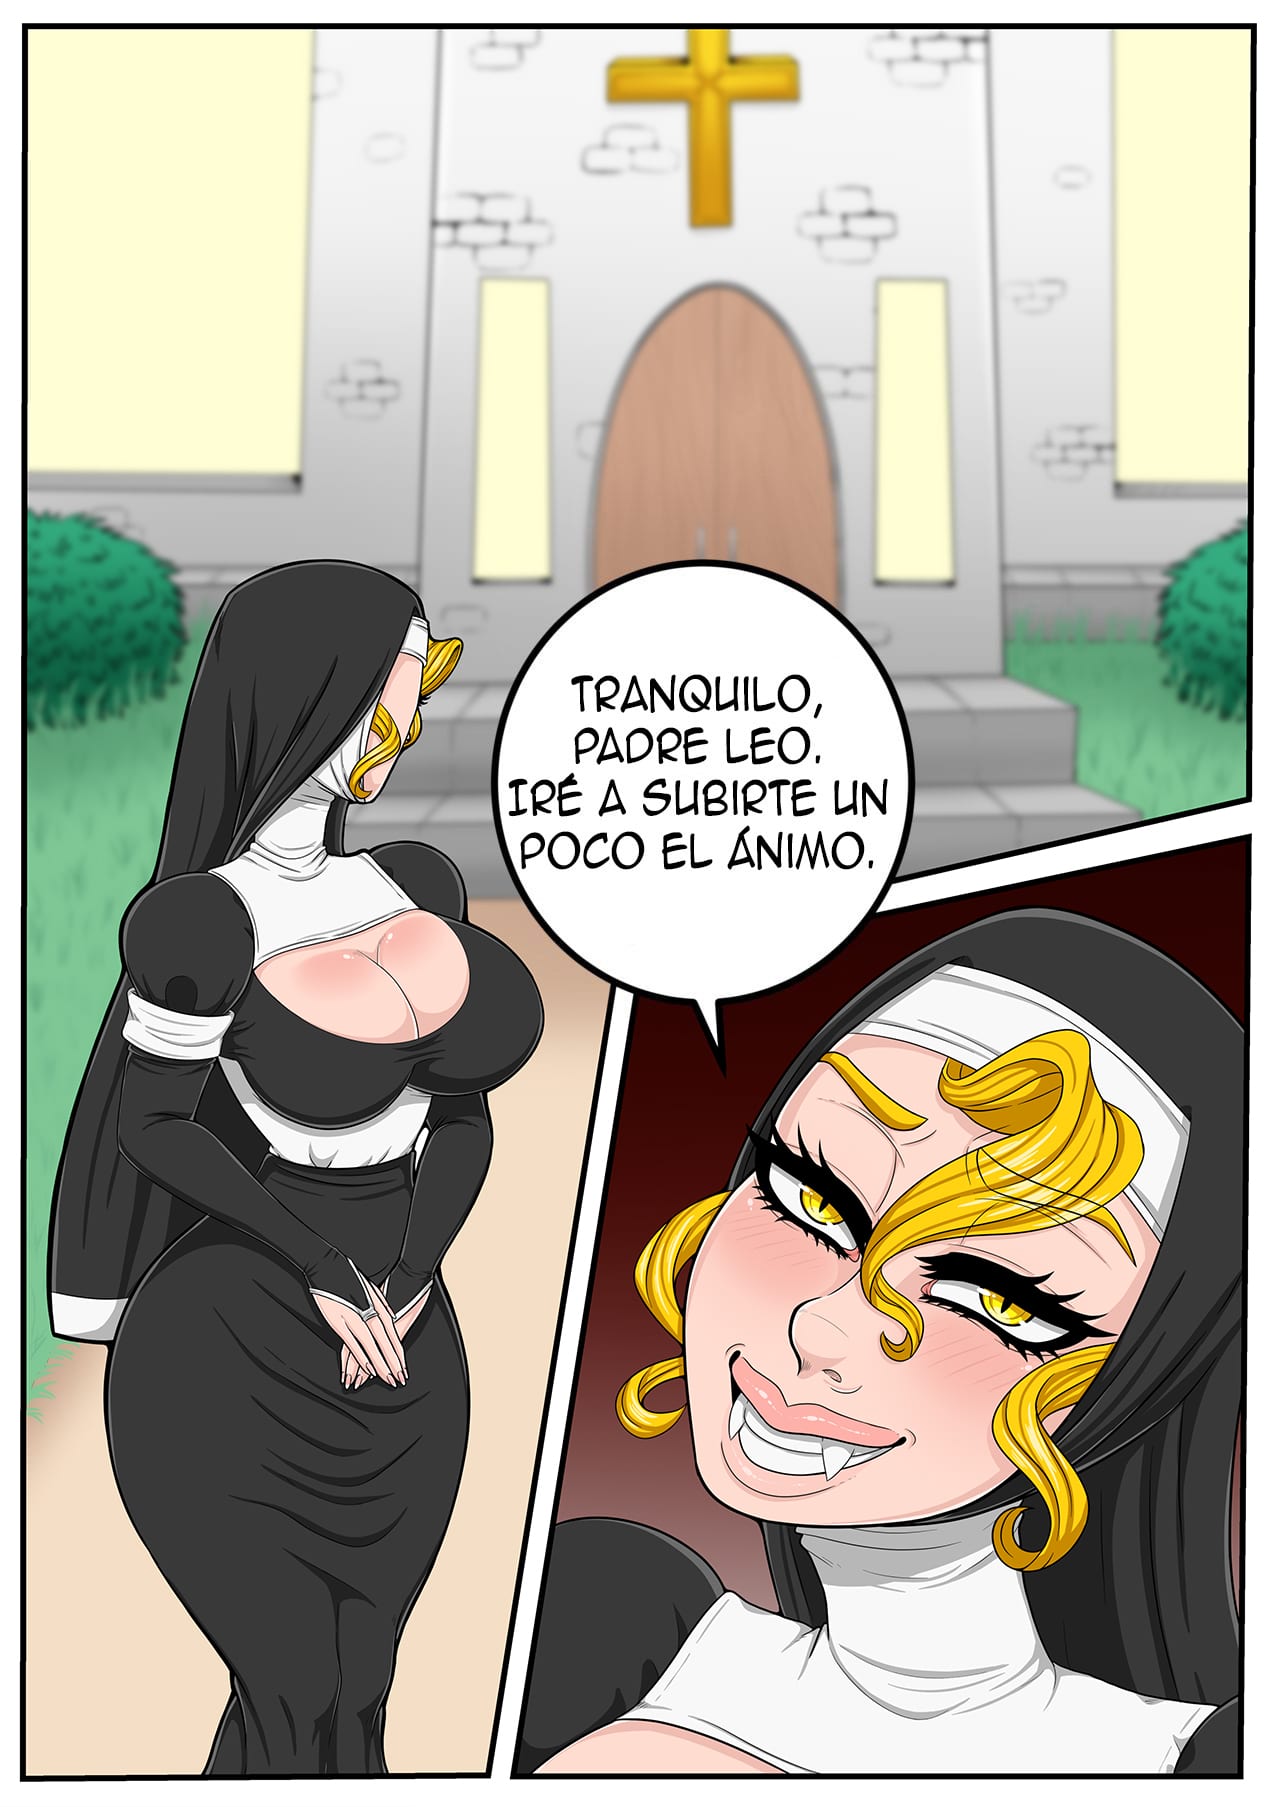 The Nun and Her Priest – GatorChan - 5